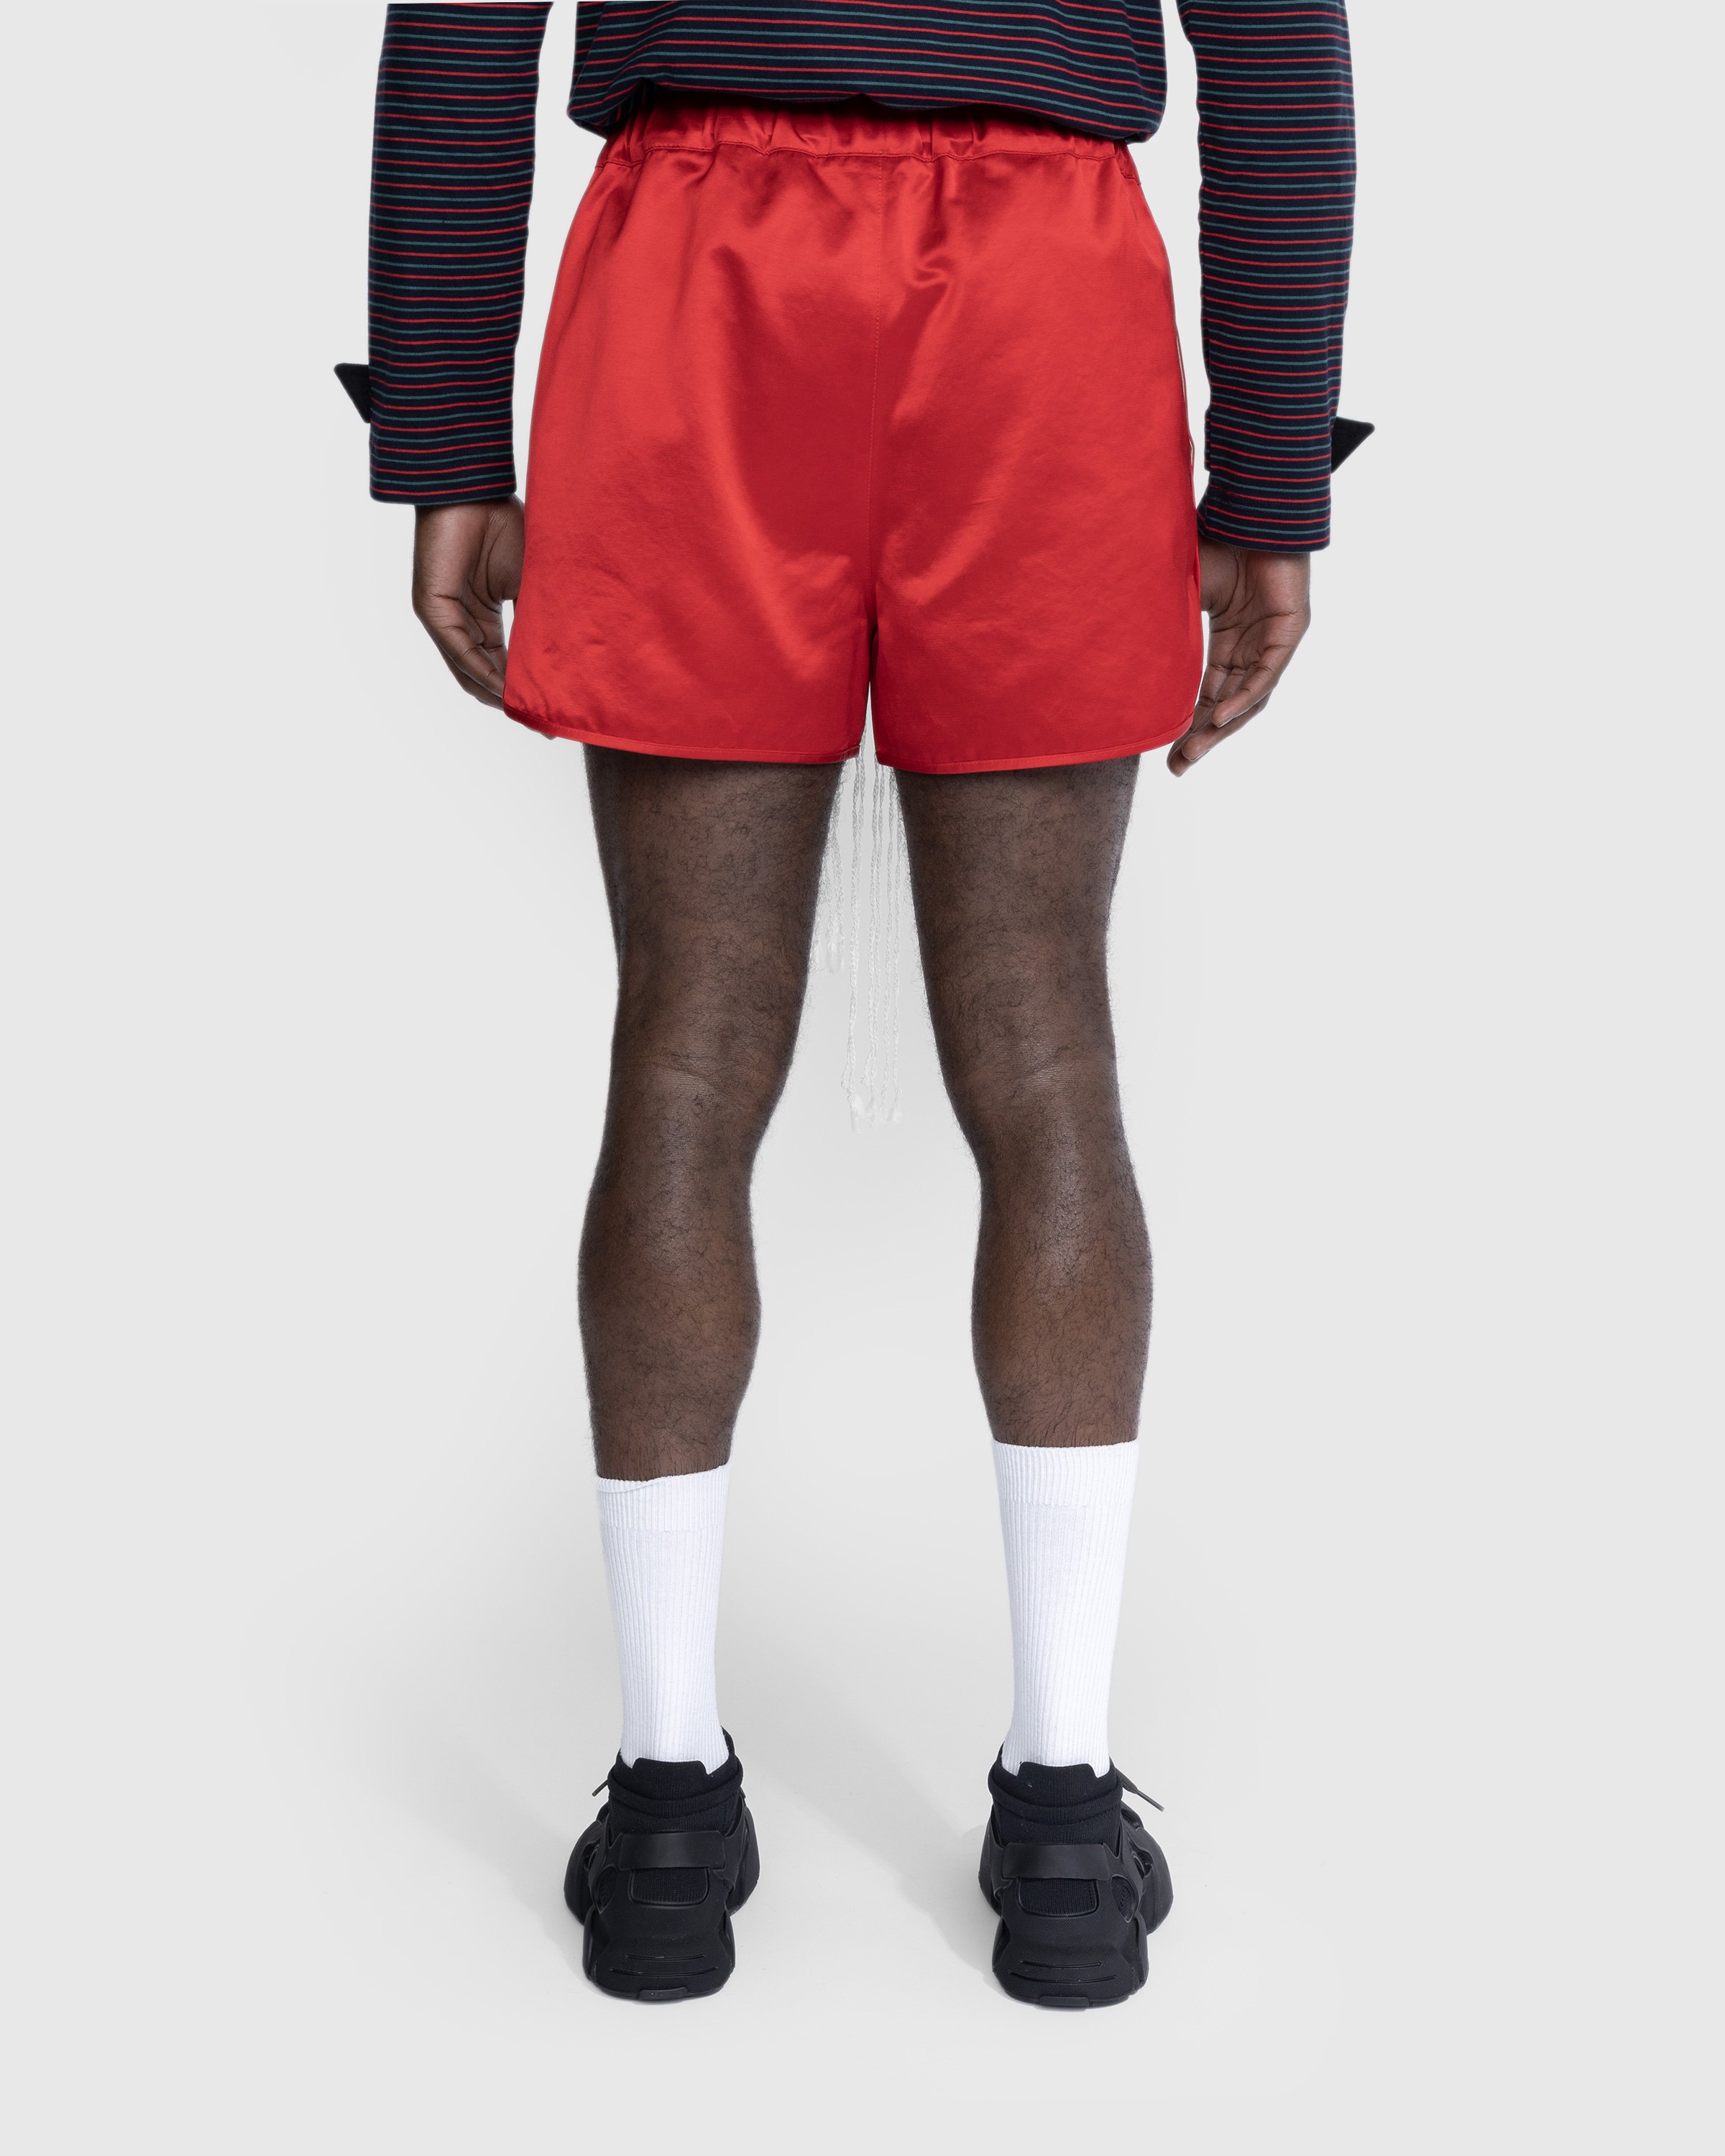 Wales Bonner - Cassette Shorts - Clothing - Red - Image 3